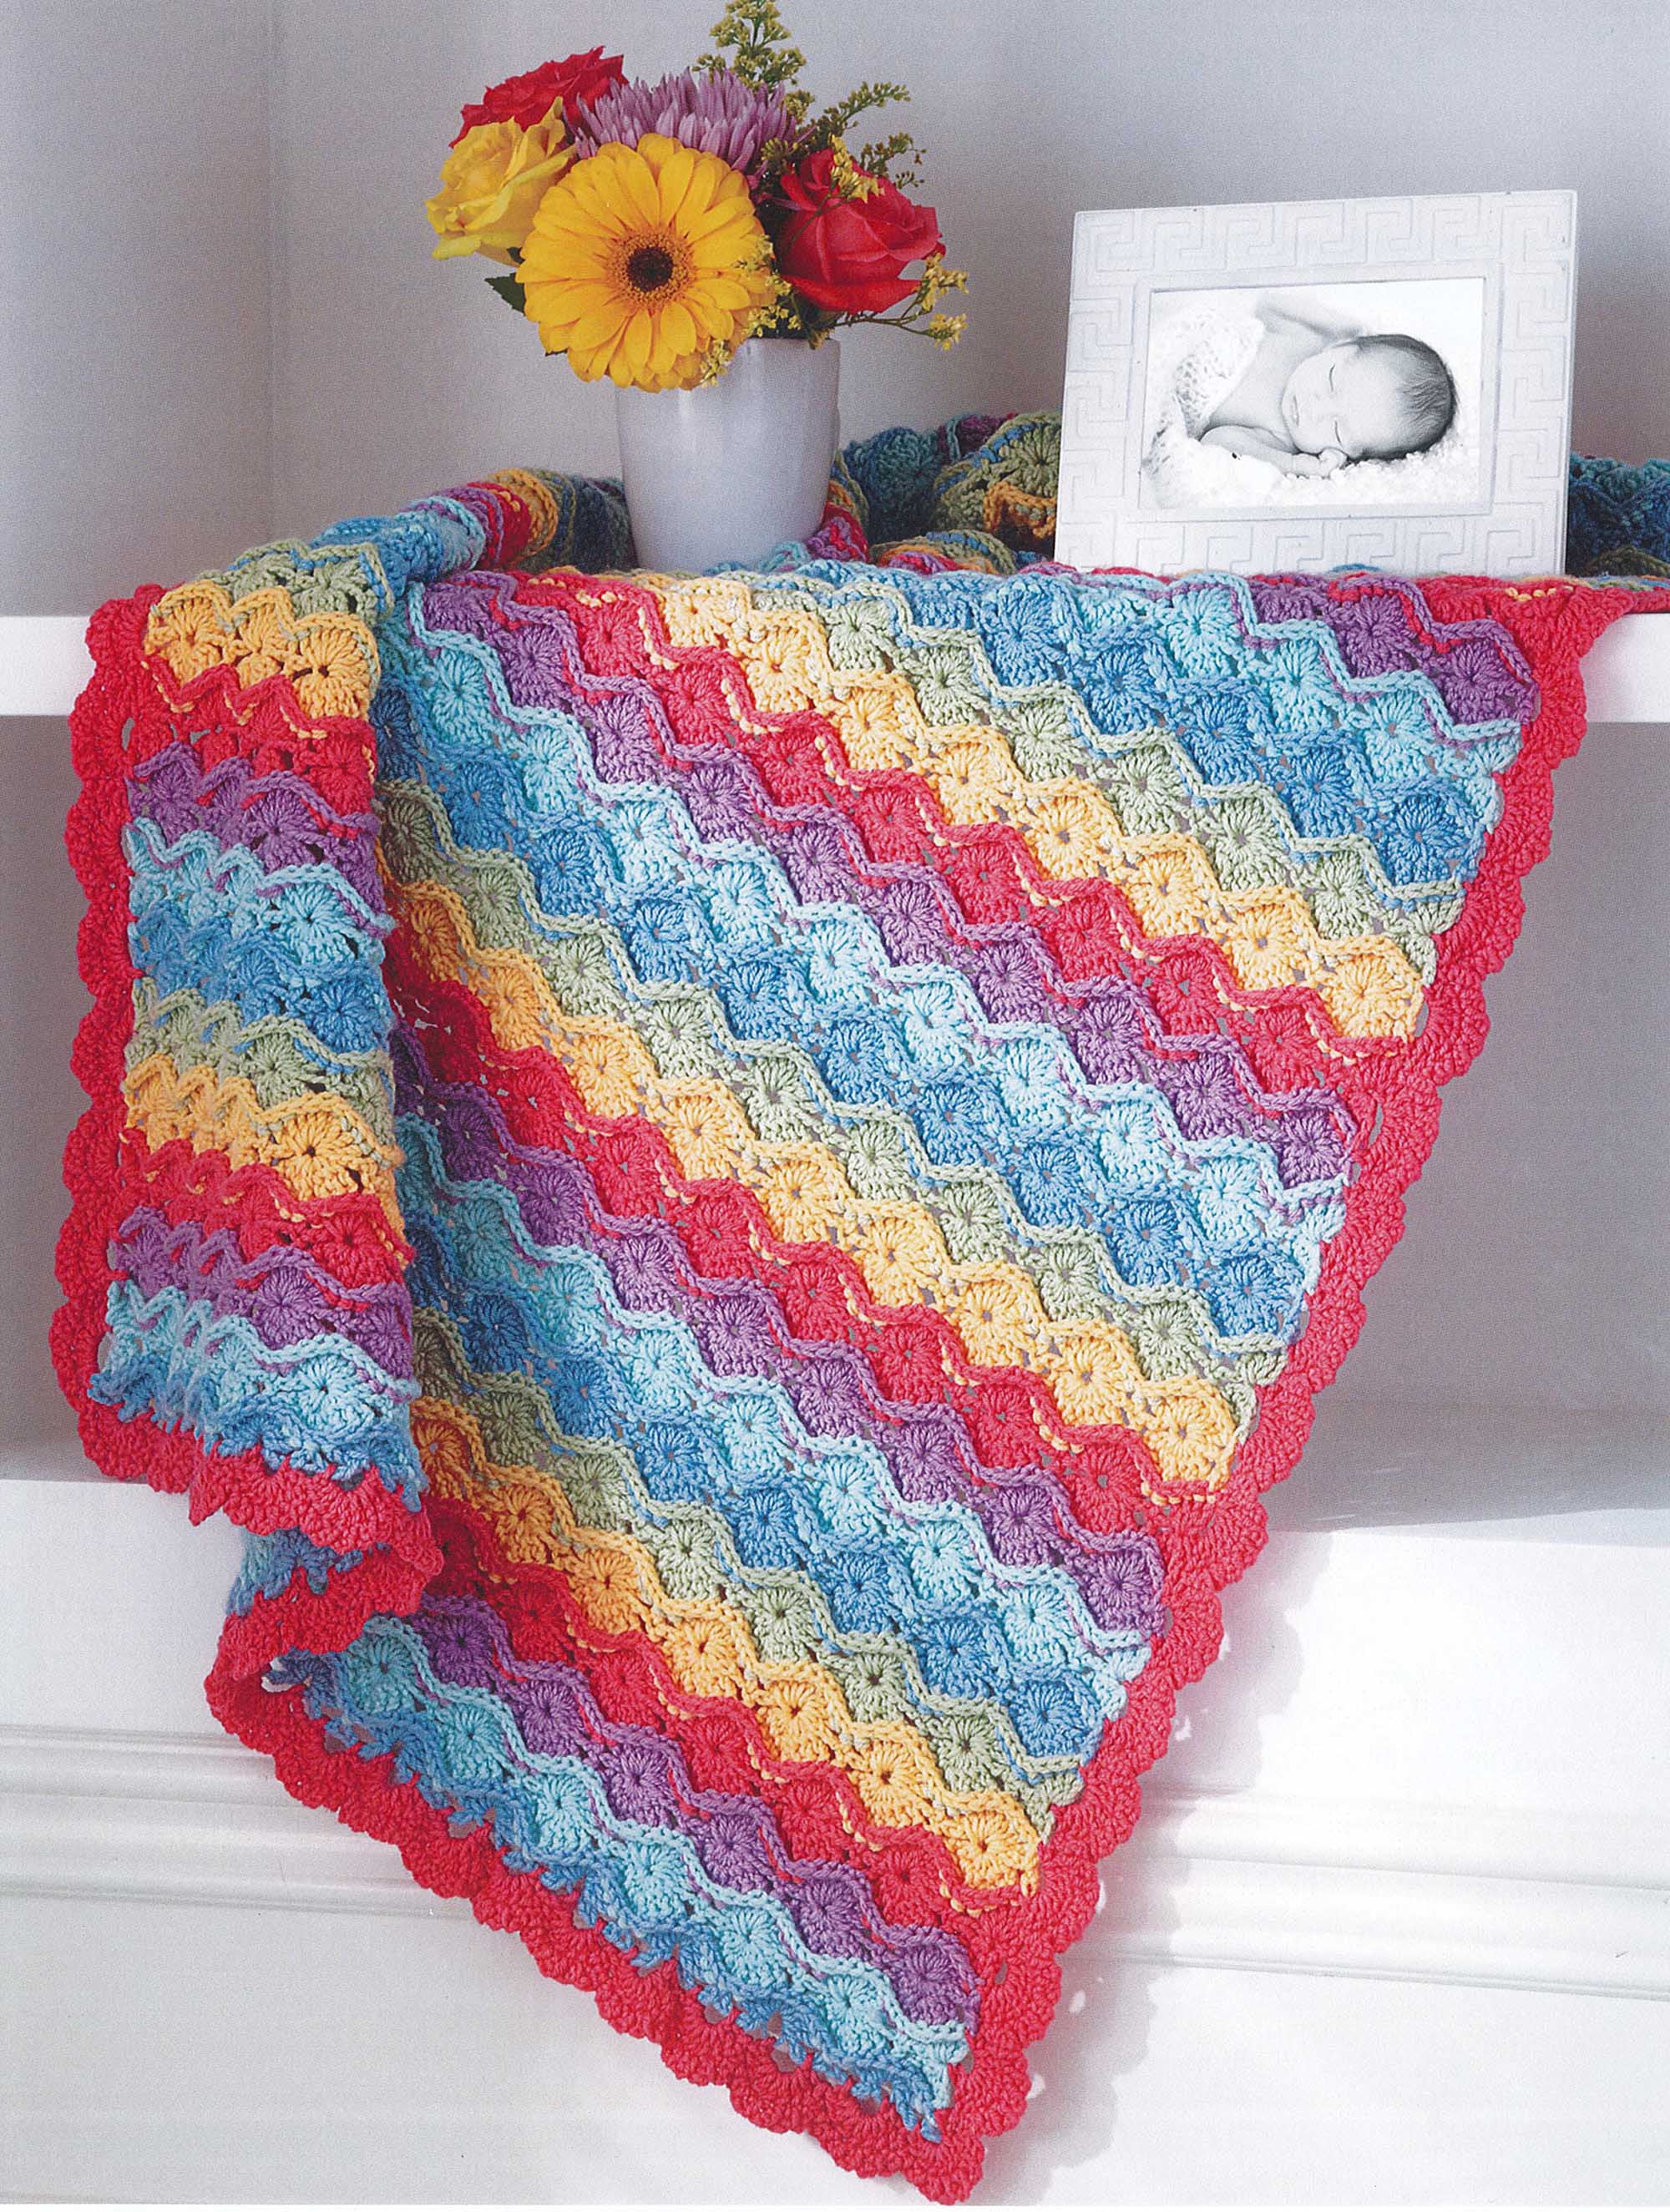 Crocheting Supplies And Crochet Colorful Baby Blanket Stock Photo -  Download Image Now - iStock